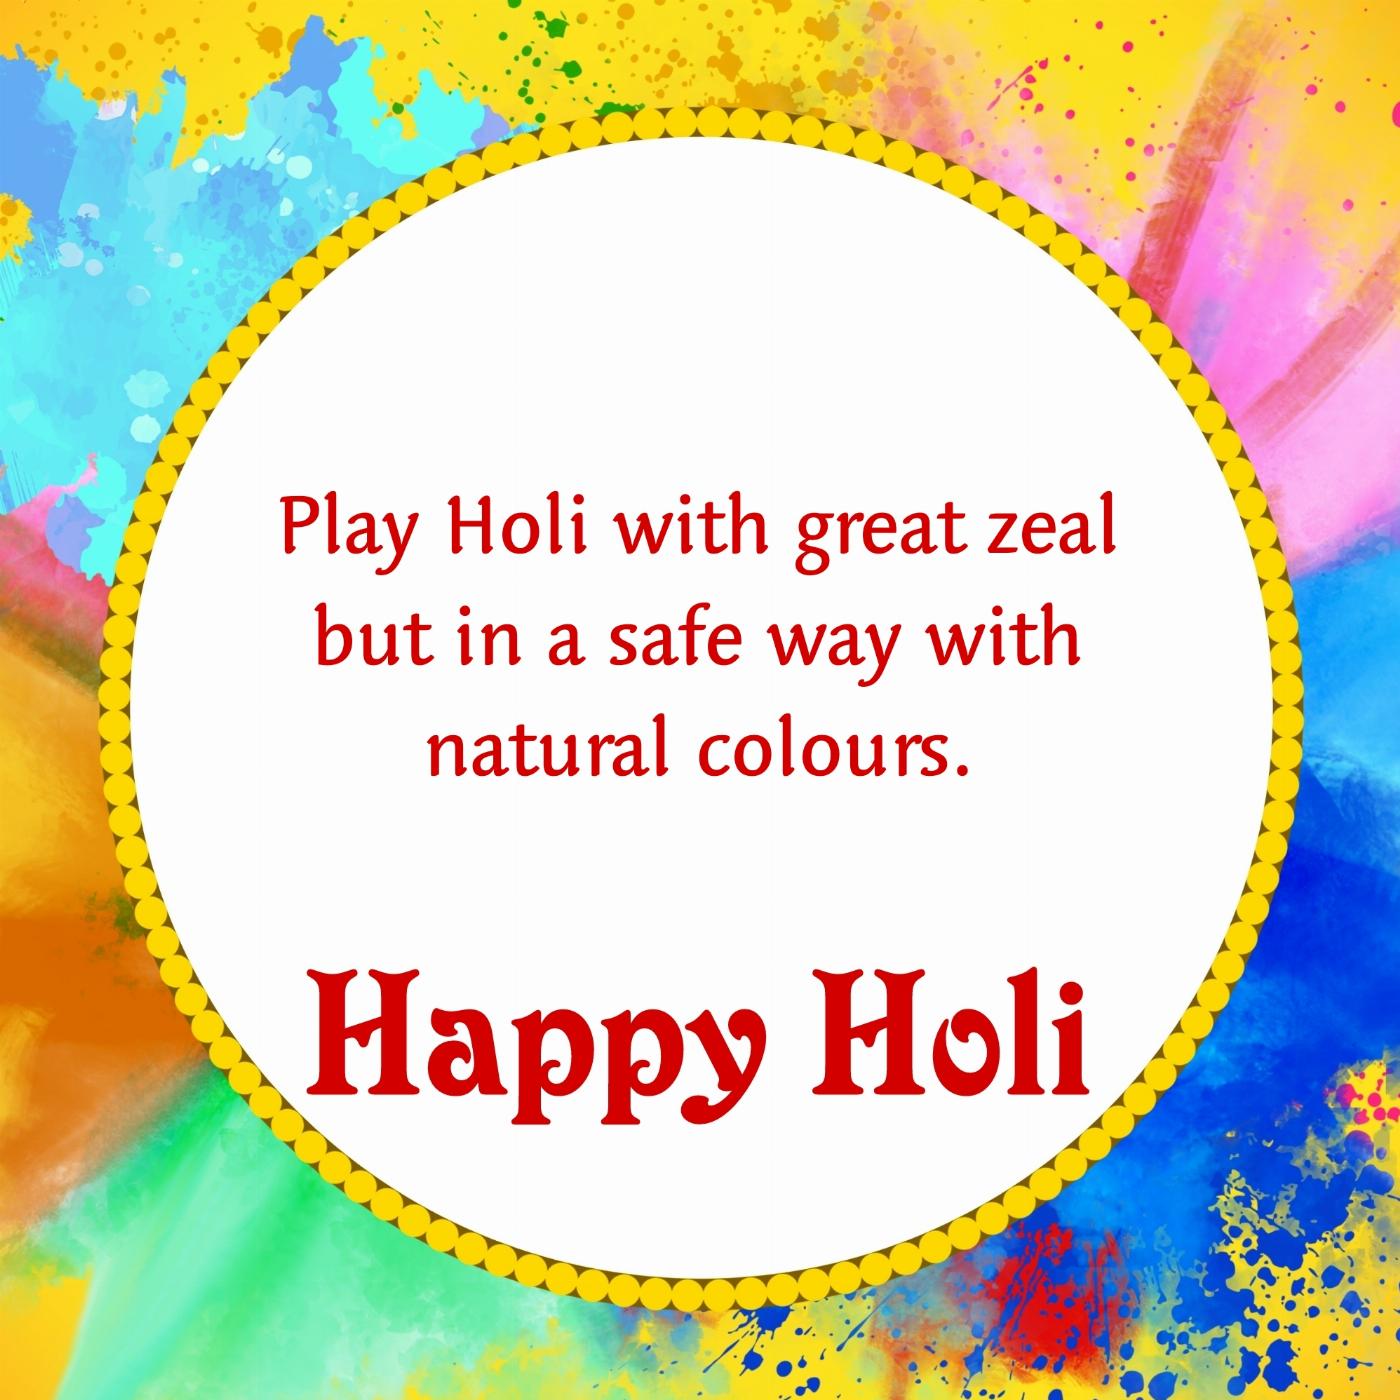 Play Holi with great zeal but in a safe way with natural colours